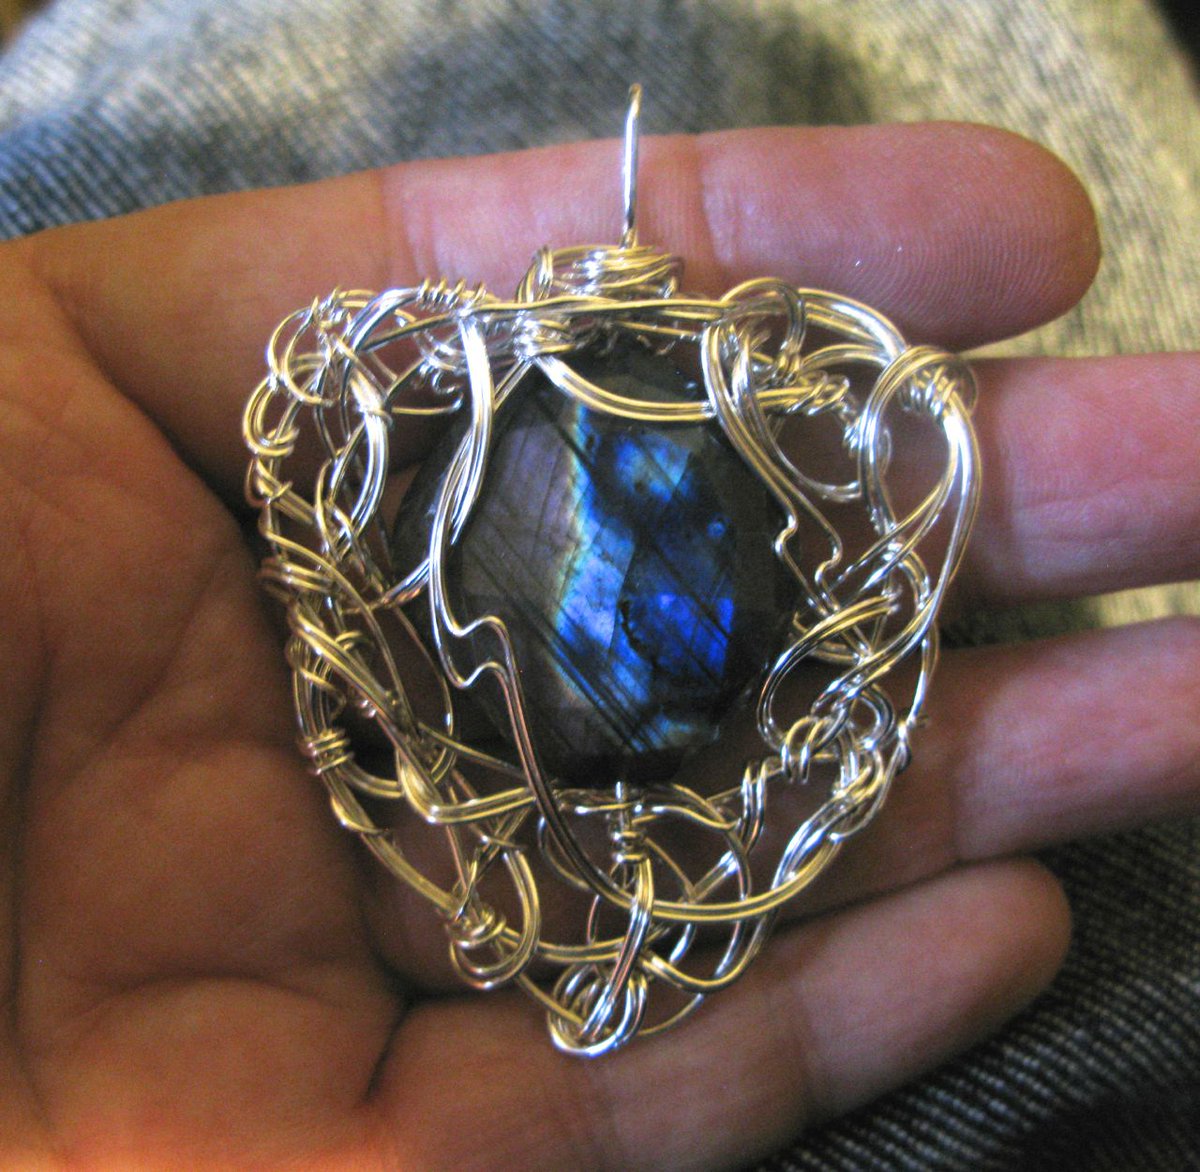 From silly to serious, now. This is "Decrypting the Nebula," a labradorite pendant with some rather interesting faceted labradorite.